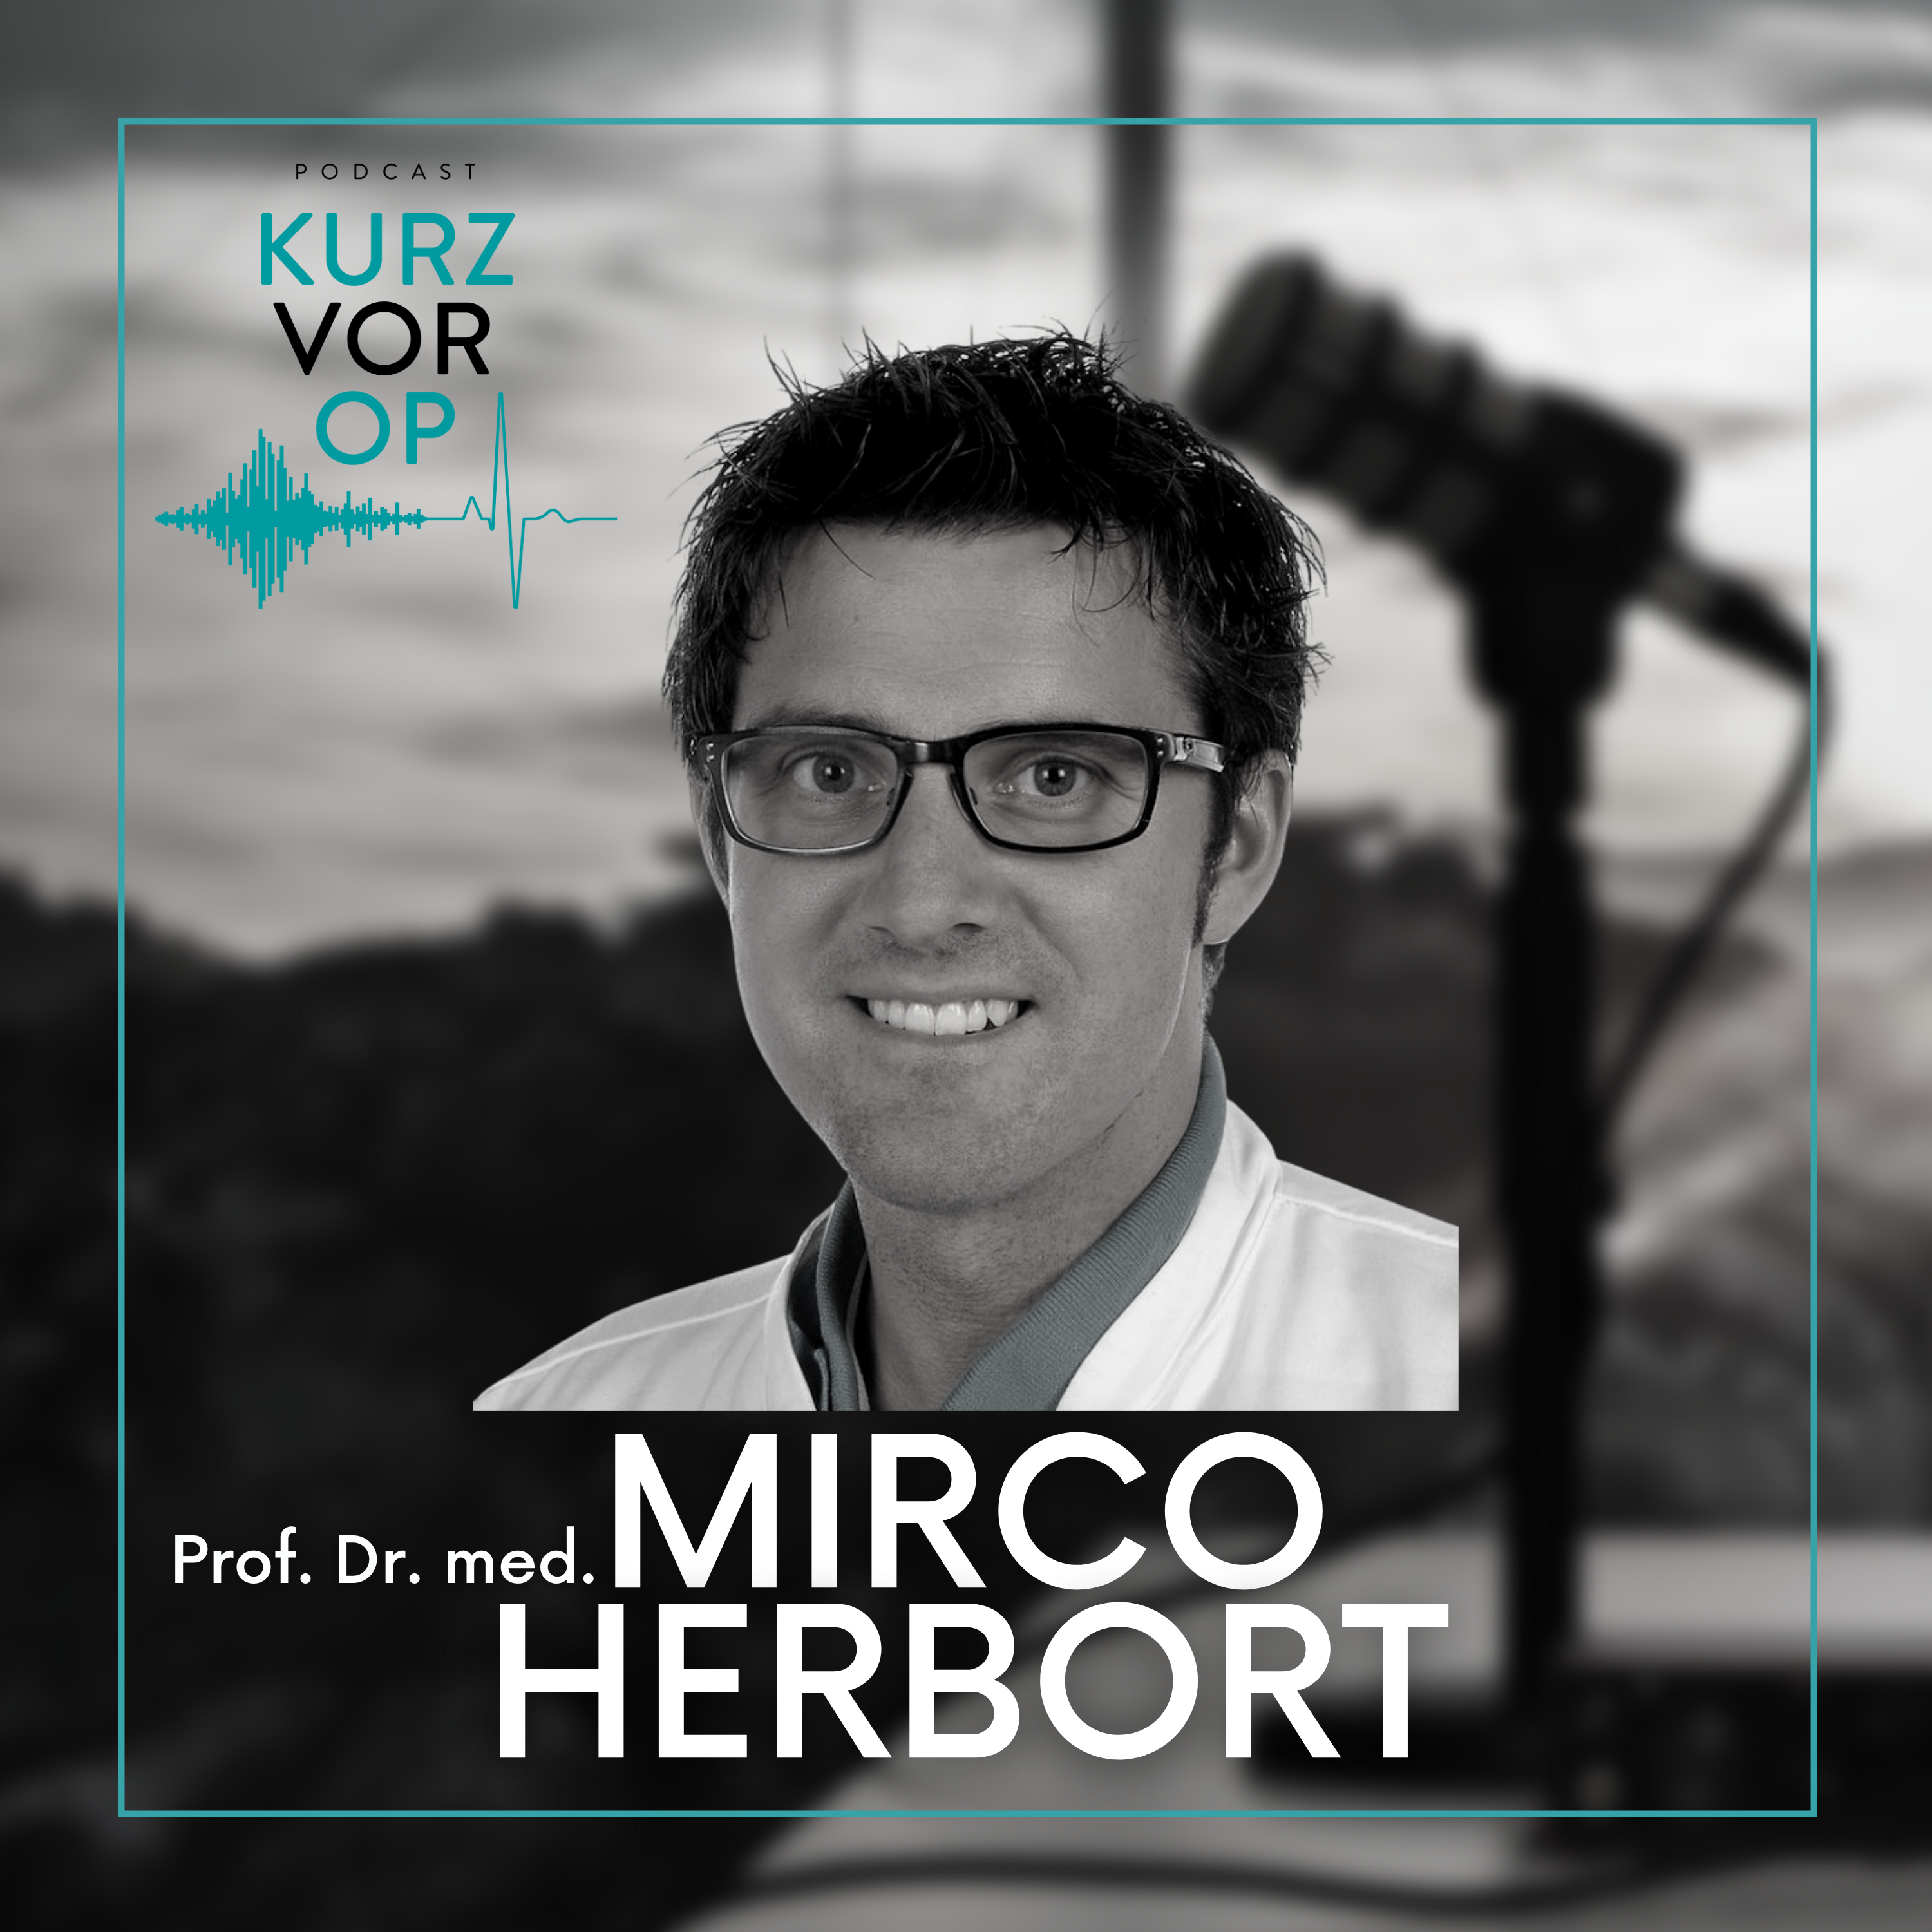 Prof. Dr. Mirco Herbort in the OPED podcast "Operation Imminent"